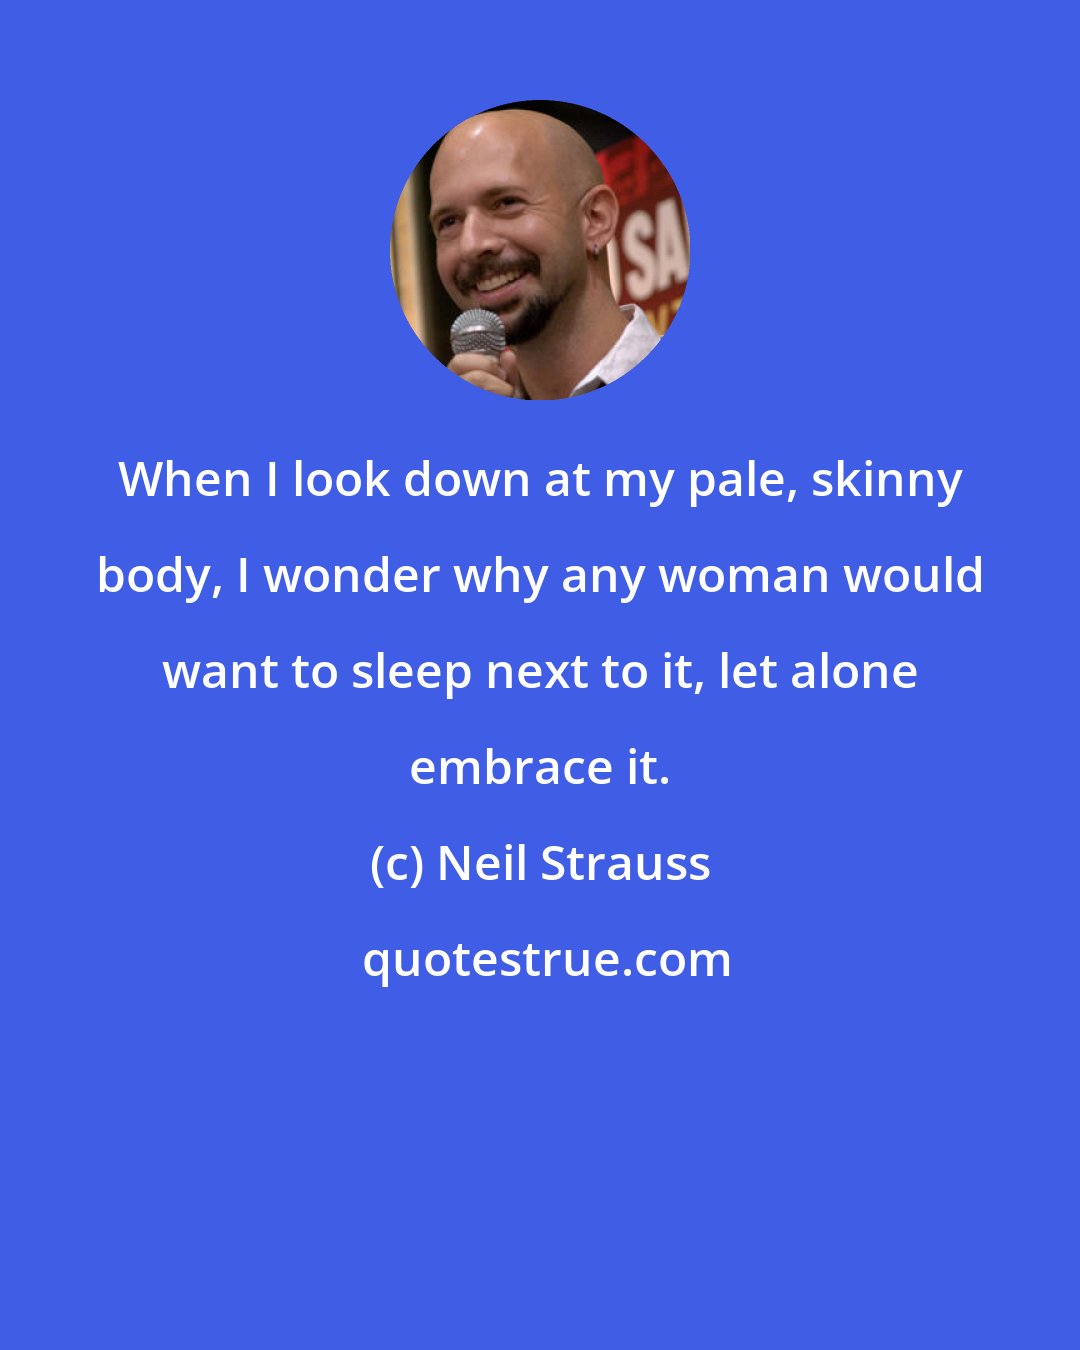 Neil Strauss: When I look down at my pale, skinny body, I wonder why any woman would want to sleep next to it, let alone embrace it.